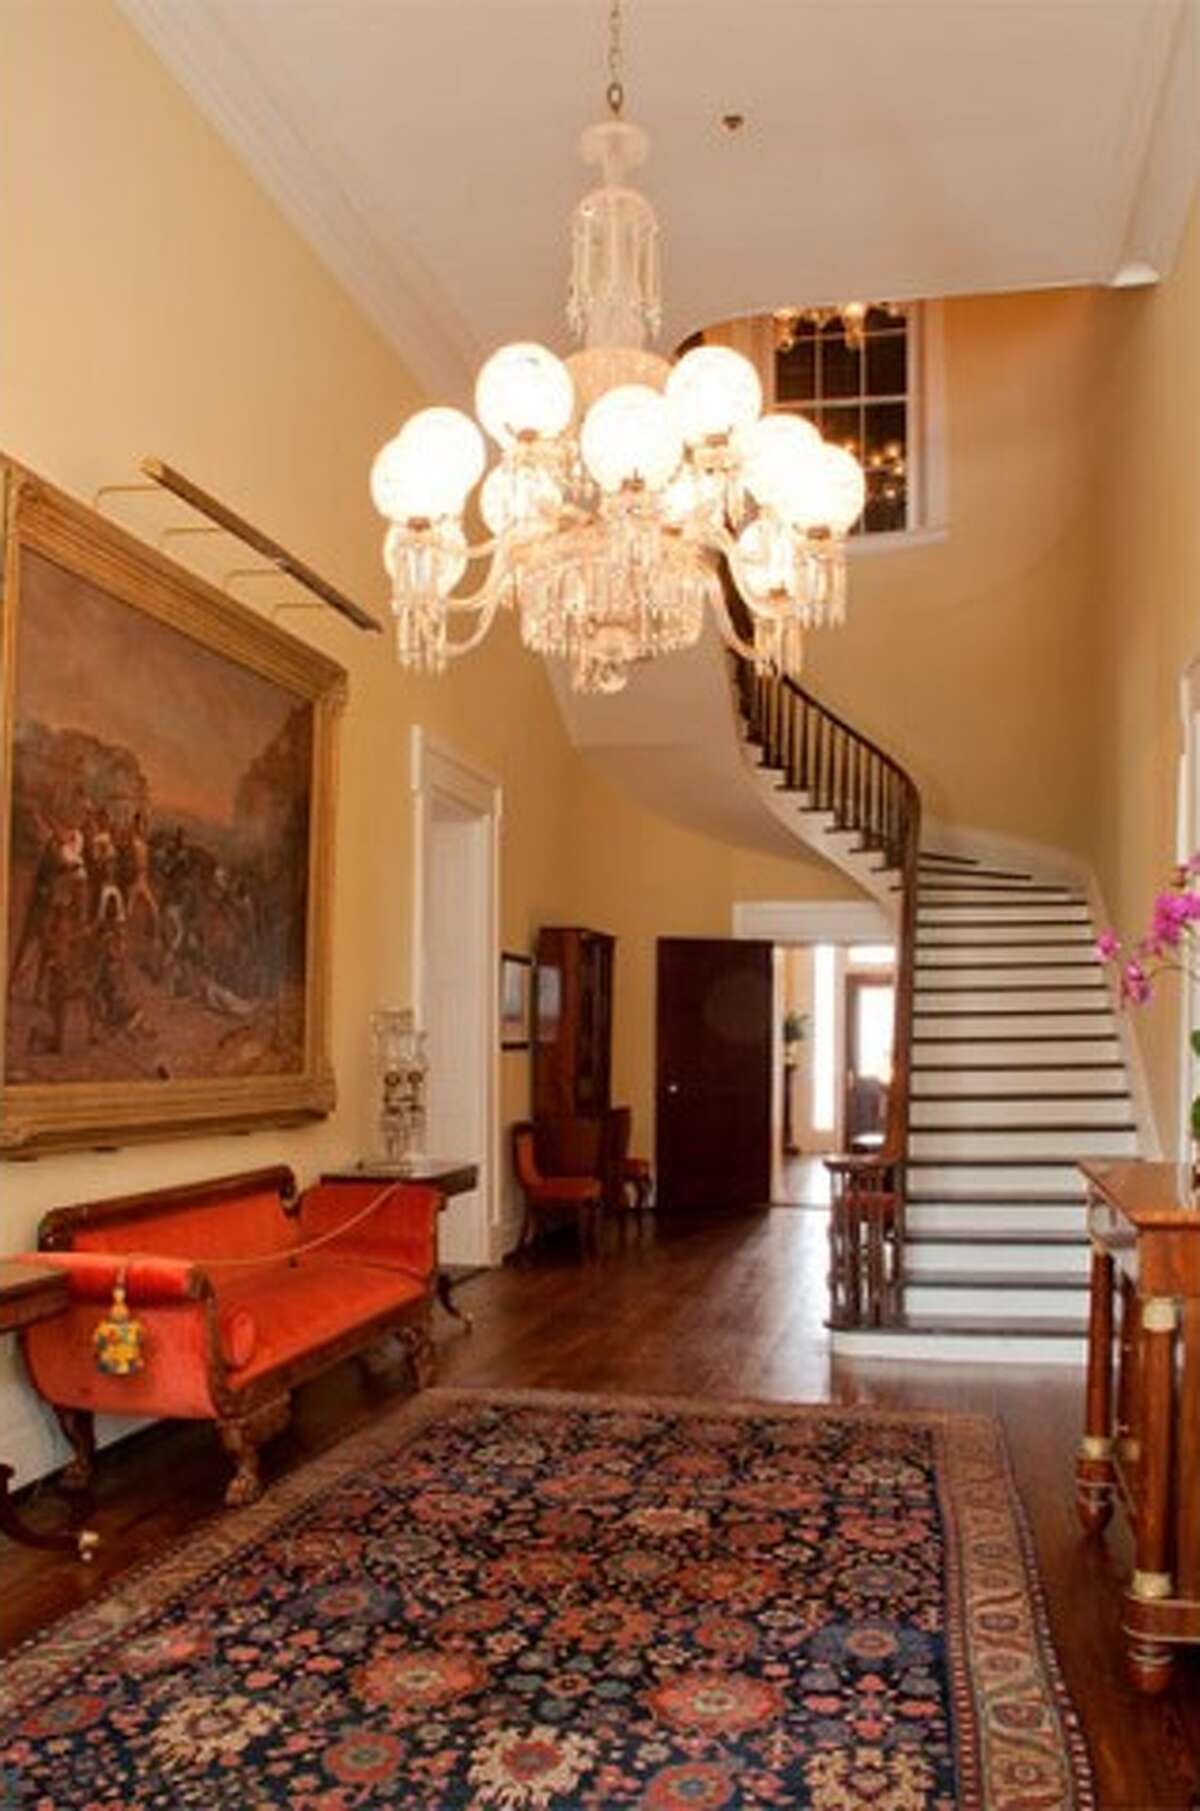 "The Entry Hall features Robert Onderdonk's monumental painting, Fall of the Alamo."